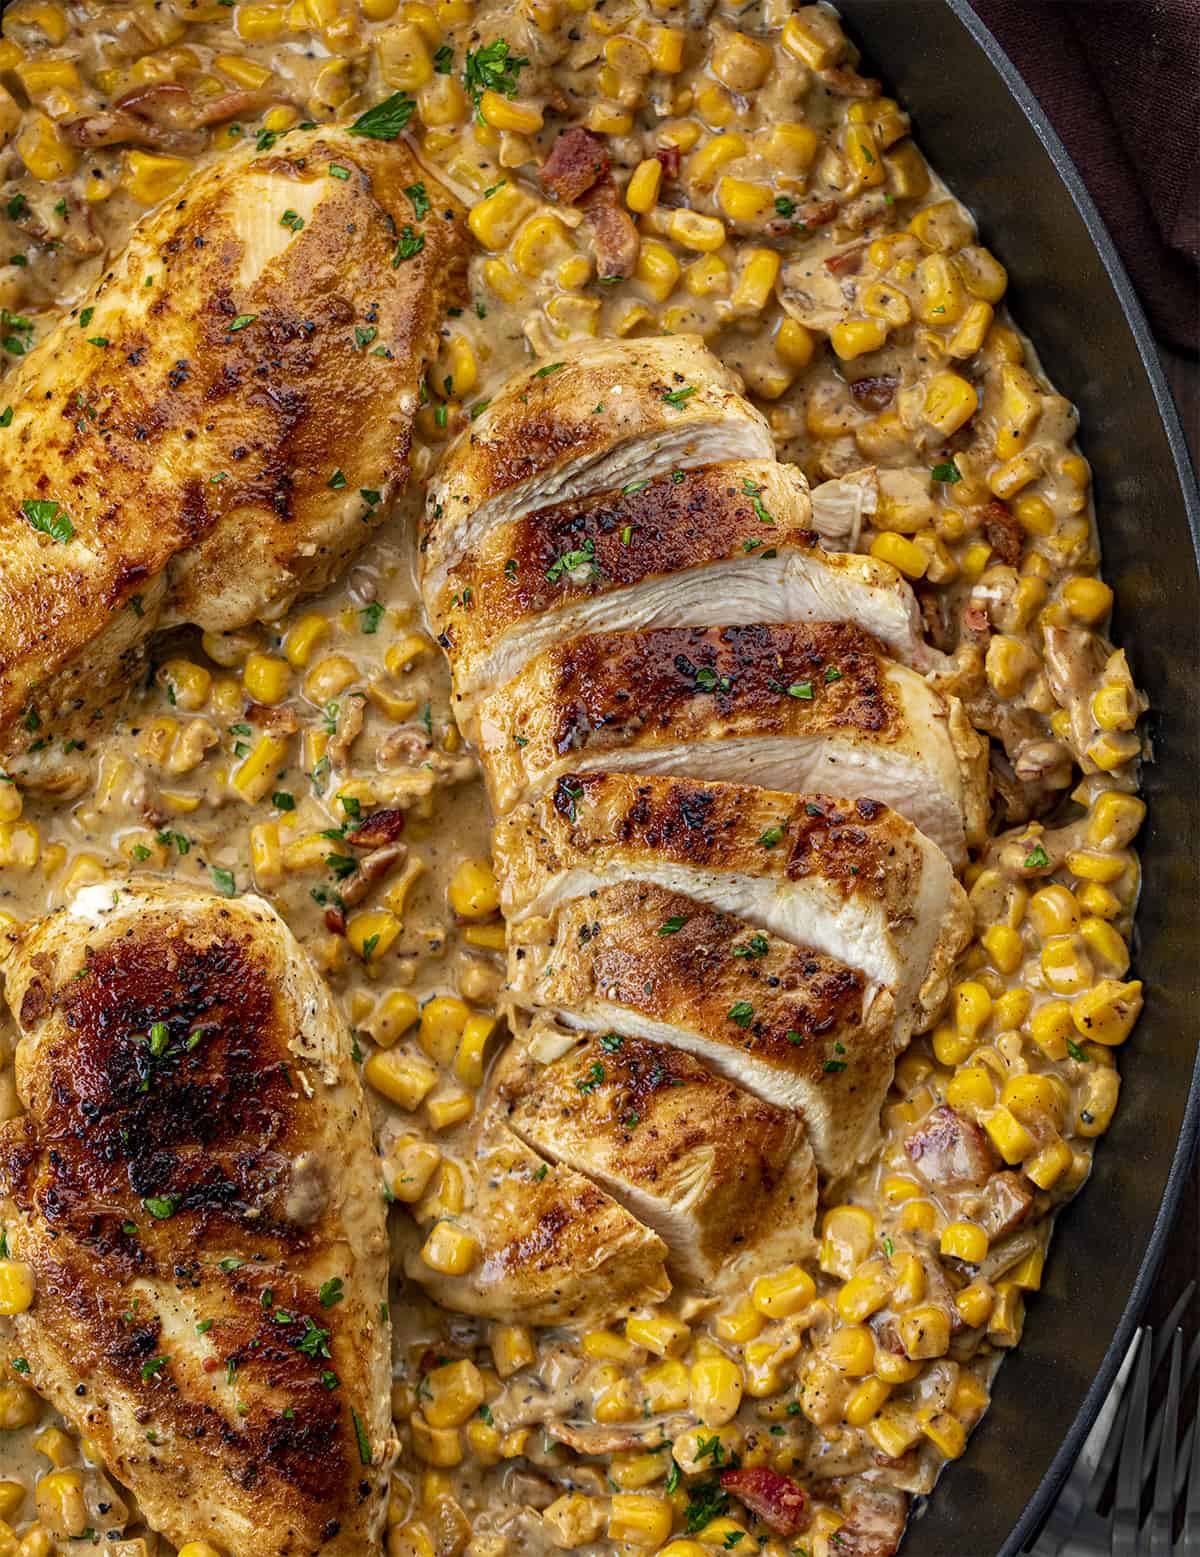 Pan of Chicken and Bacon Creamed Corn with Chicken Sliced from OVerhead. Dinner, Supper, Chicken, Chicken Recipes, Chicken with Creamed Corn, Garlic Butter Creamed Corn Chicken, Dinner Ideas, homestead recipes, recipes, i am homesteader, iamhomesteader